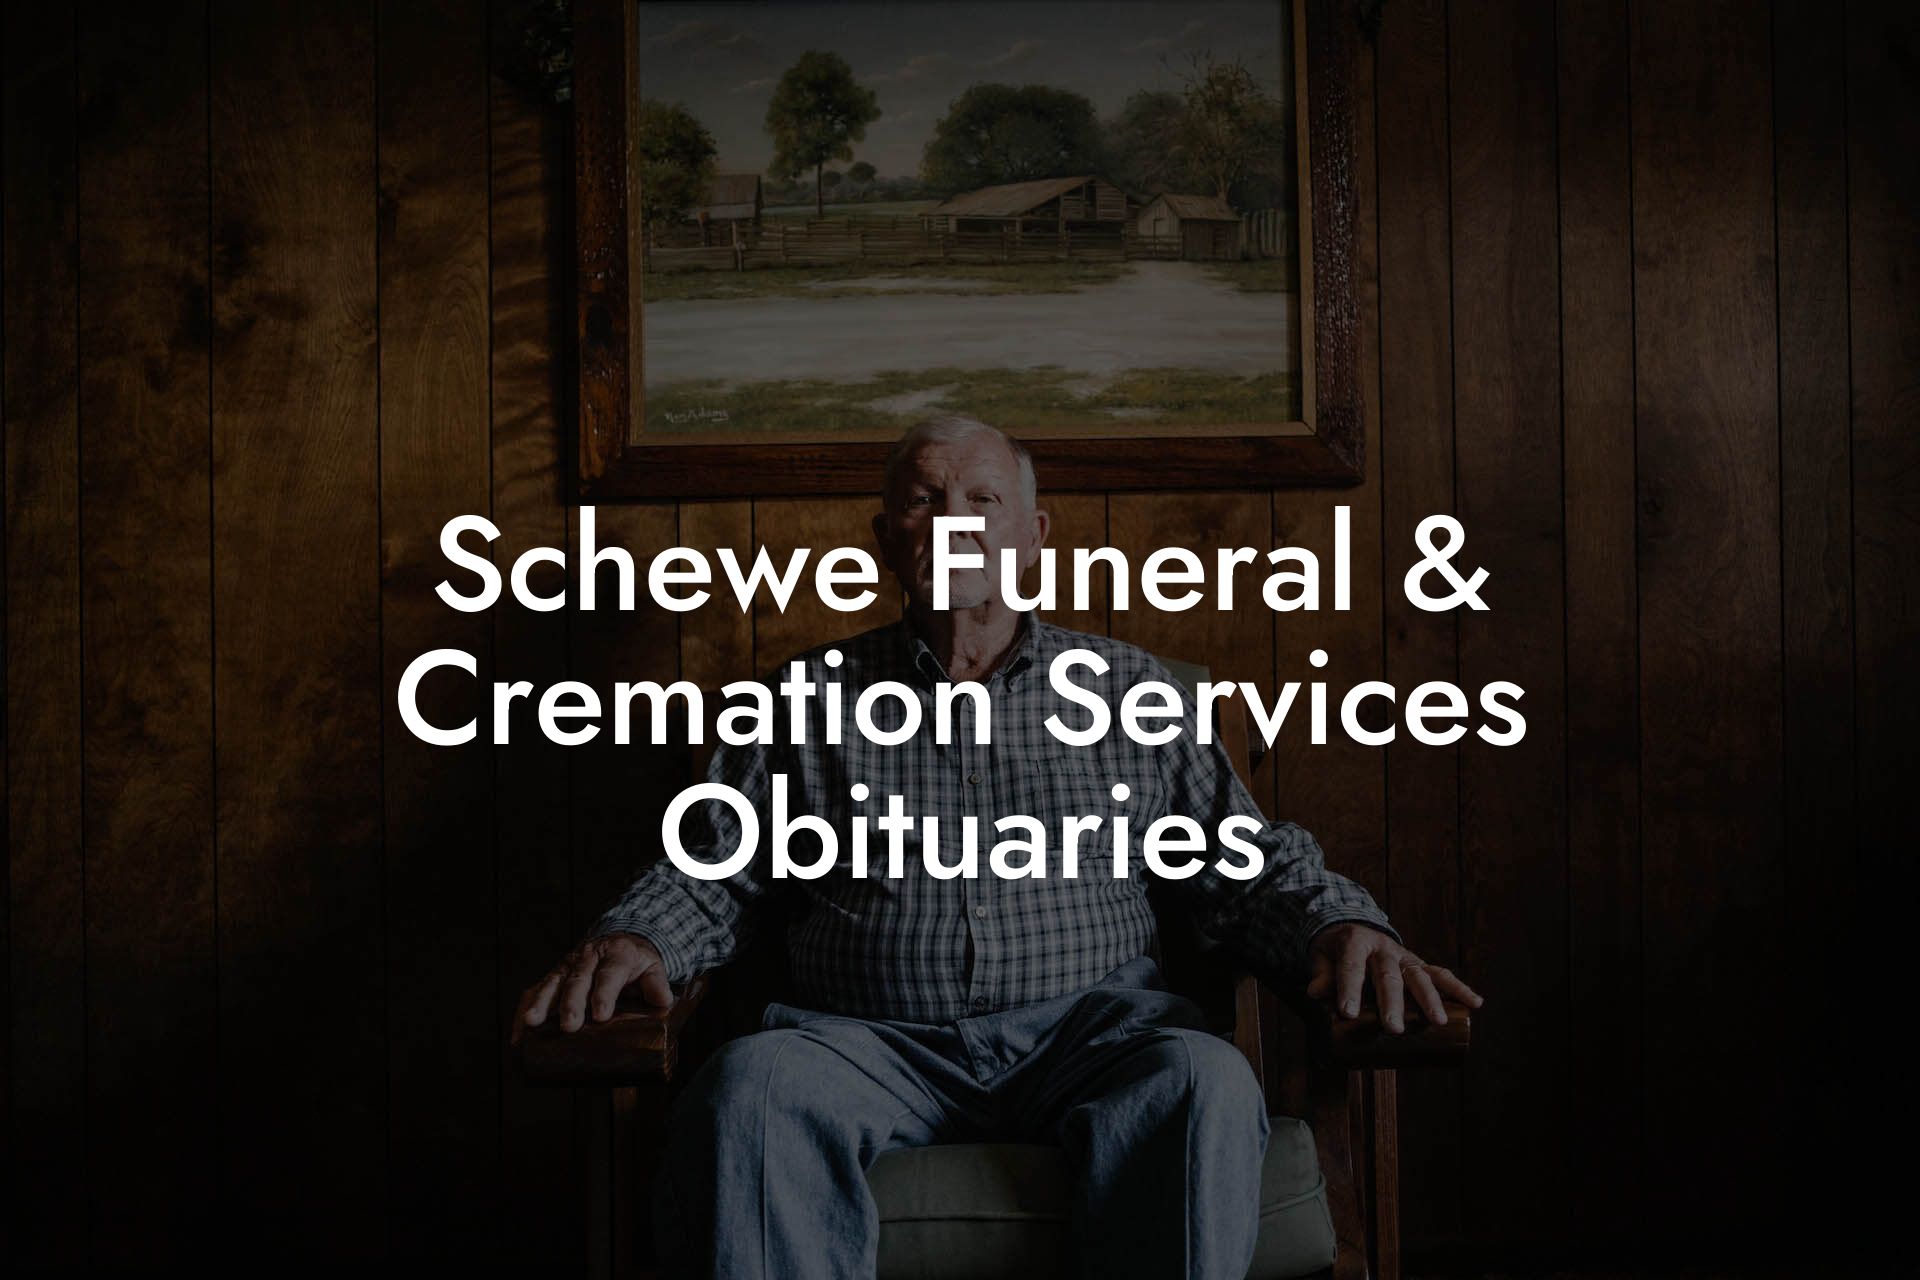 Schewe Funeral & Cremation Services Obituaries